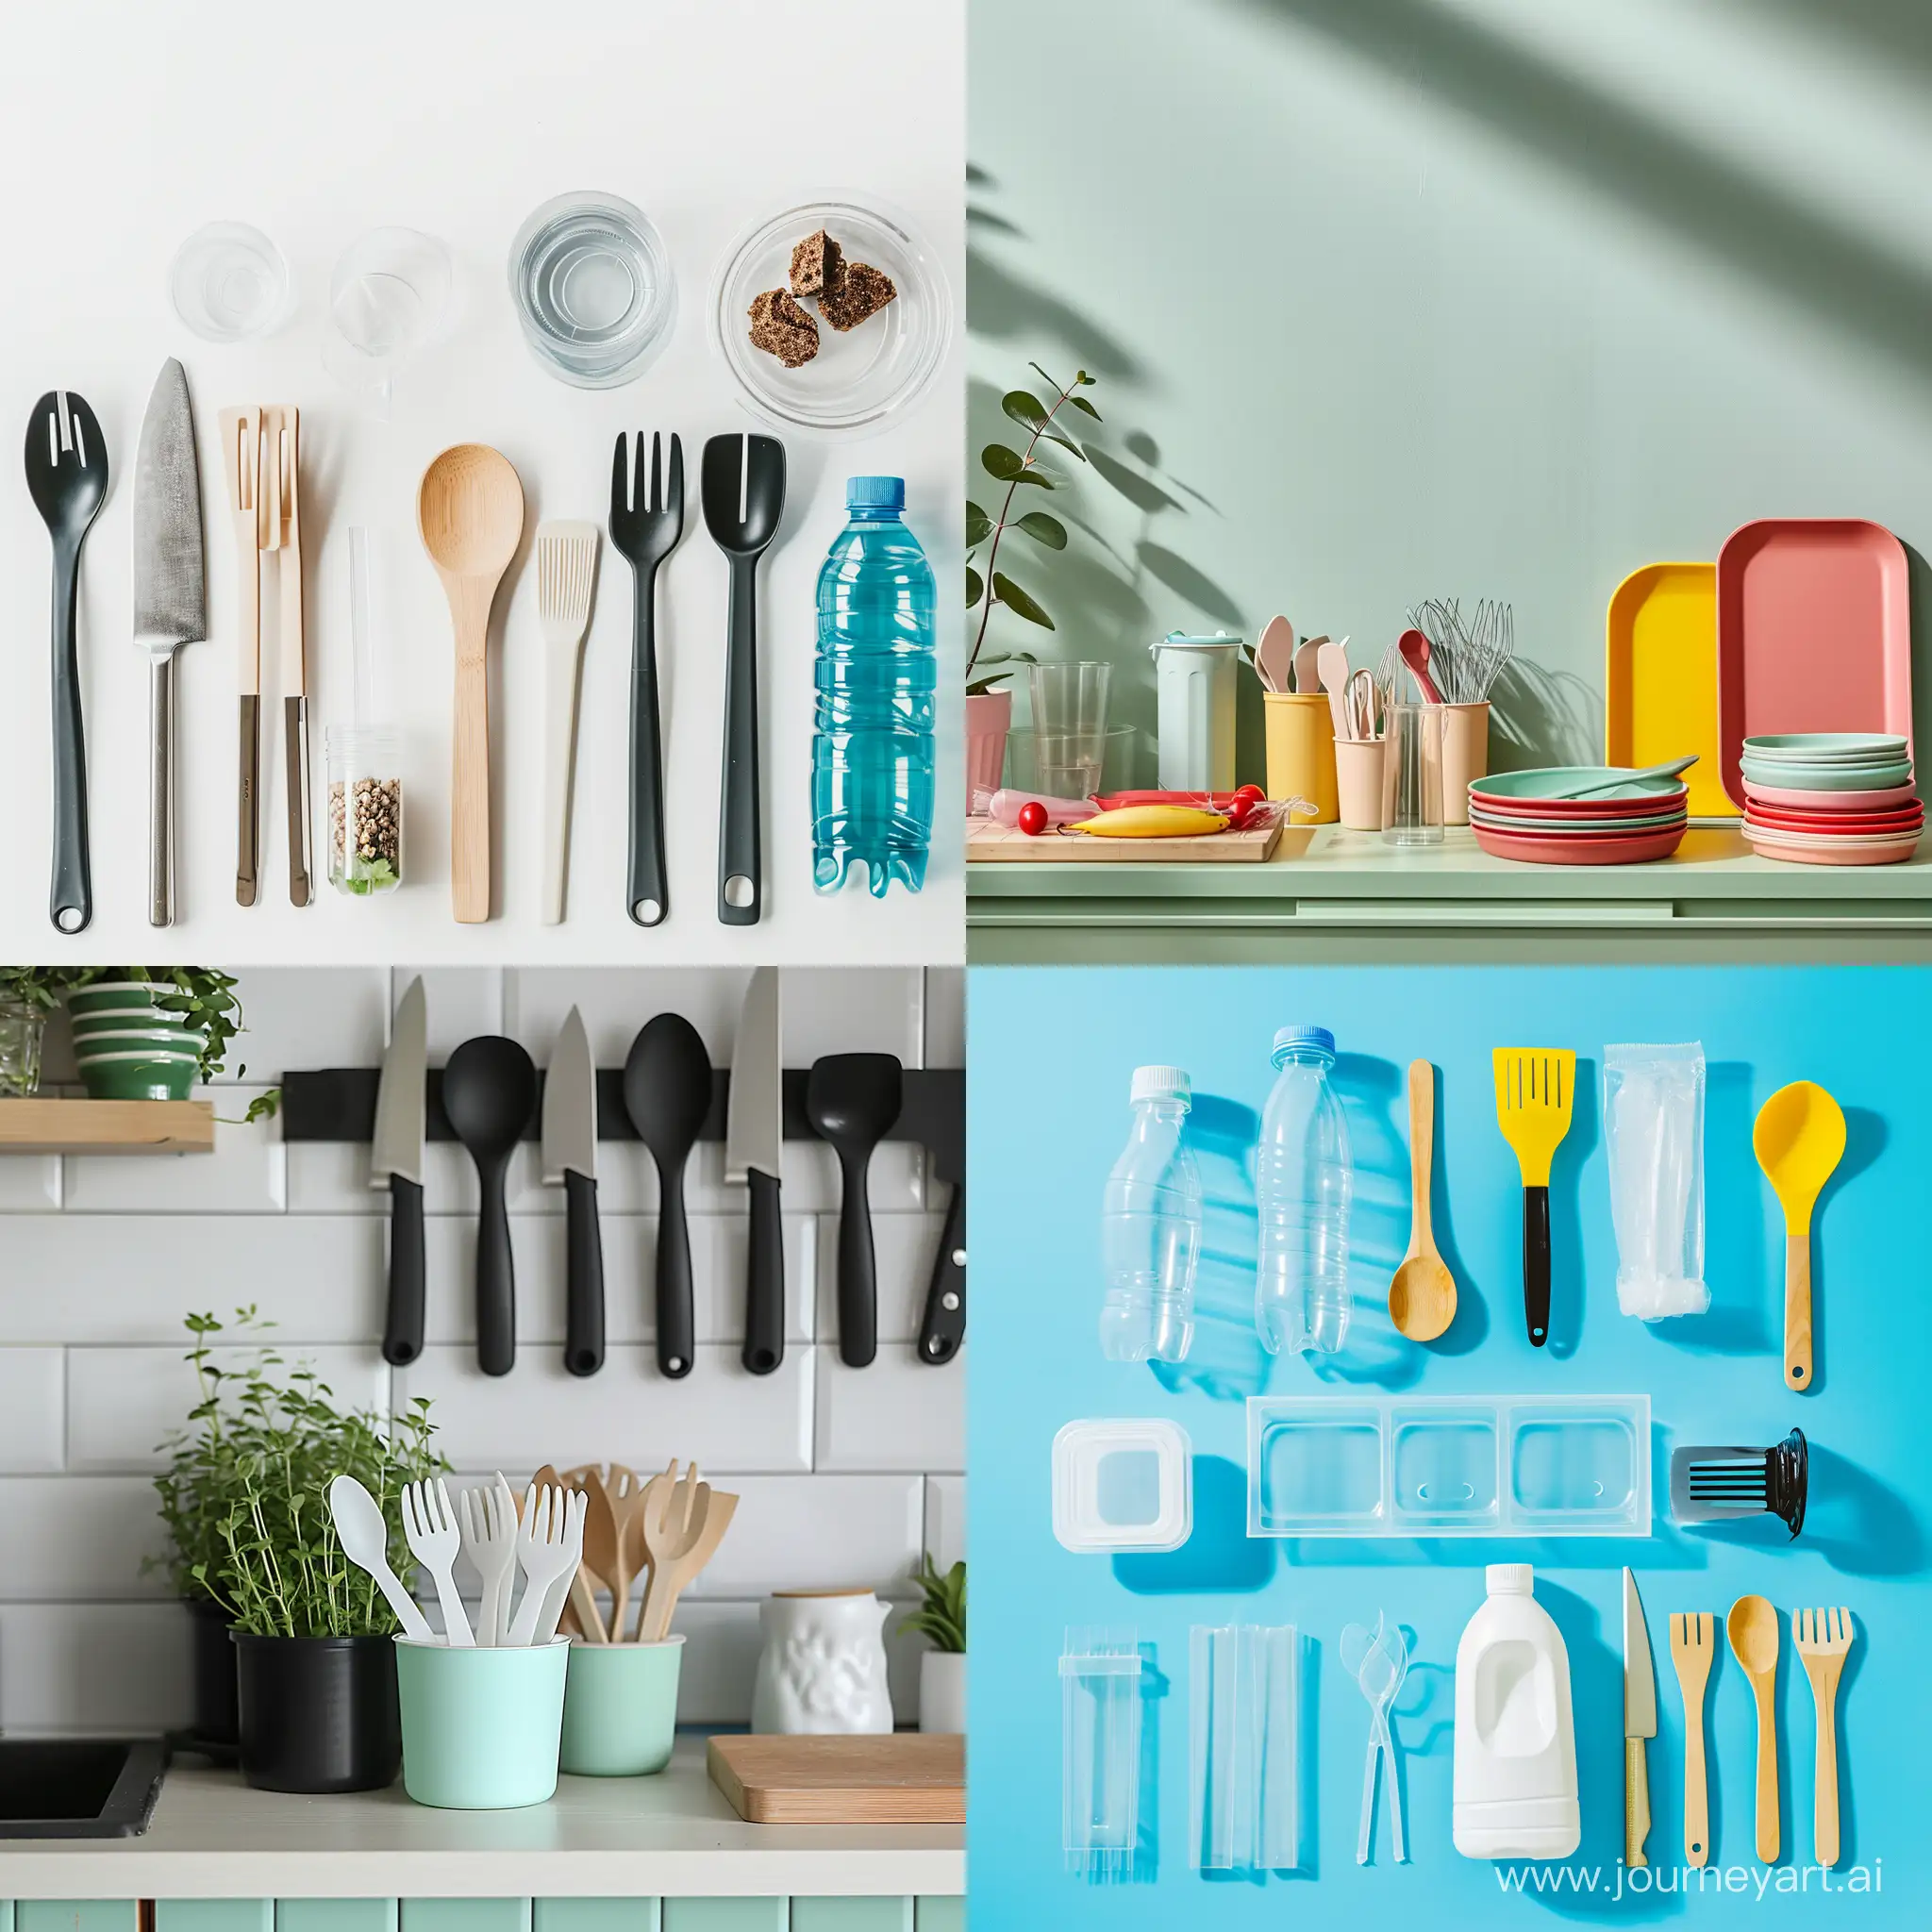 Reducing-SingleUse-Plastics-in-Your-Kitchen-Breaking-Free-Guide